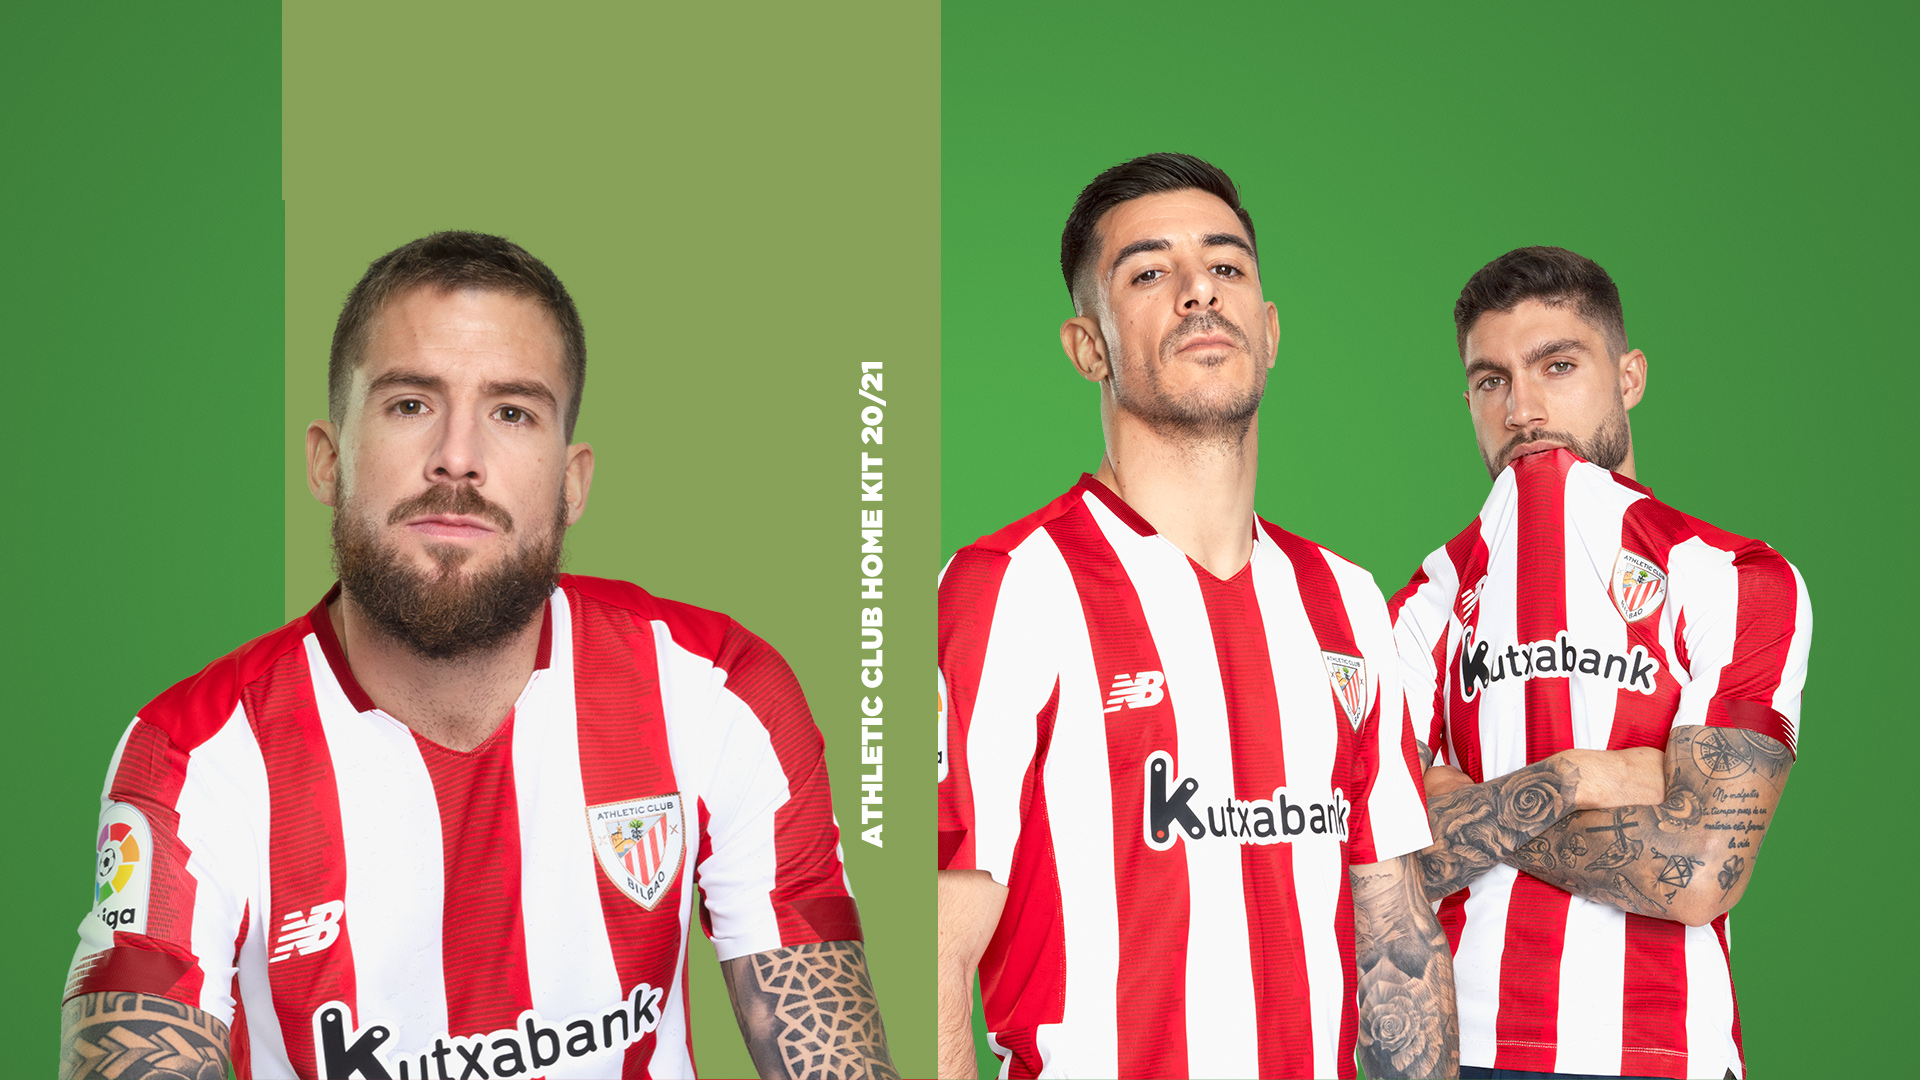 Athletic Club’s 2020-21 home kit is out now